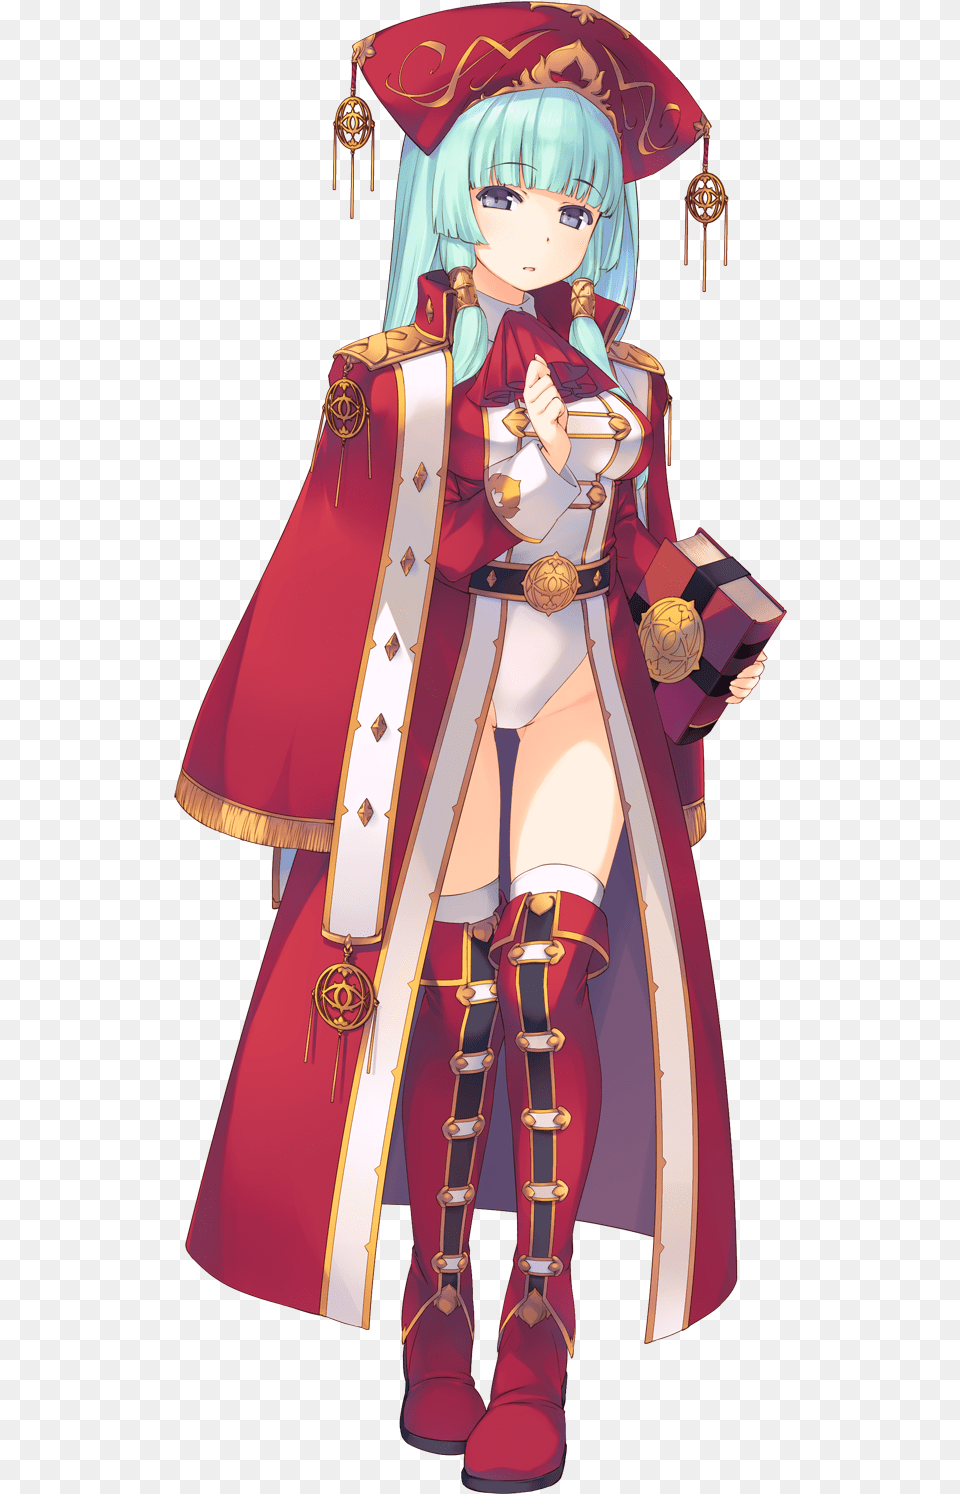 Click For Full Sized Image Fiora Marsh Dungeon Travelers 2 Fiora Marsh, Book, Publication, Person, Comics Png